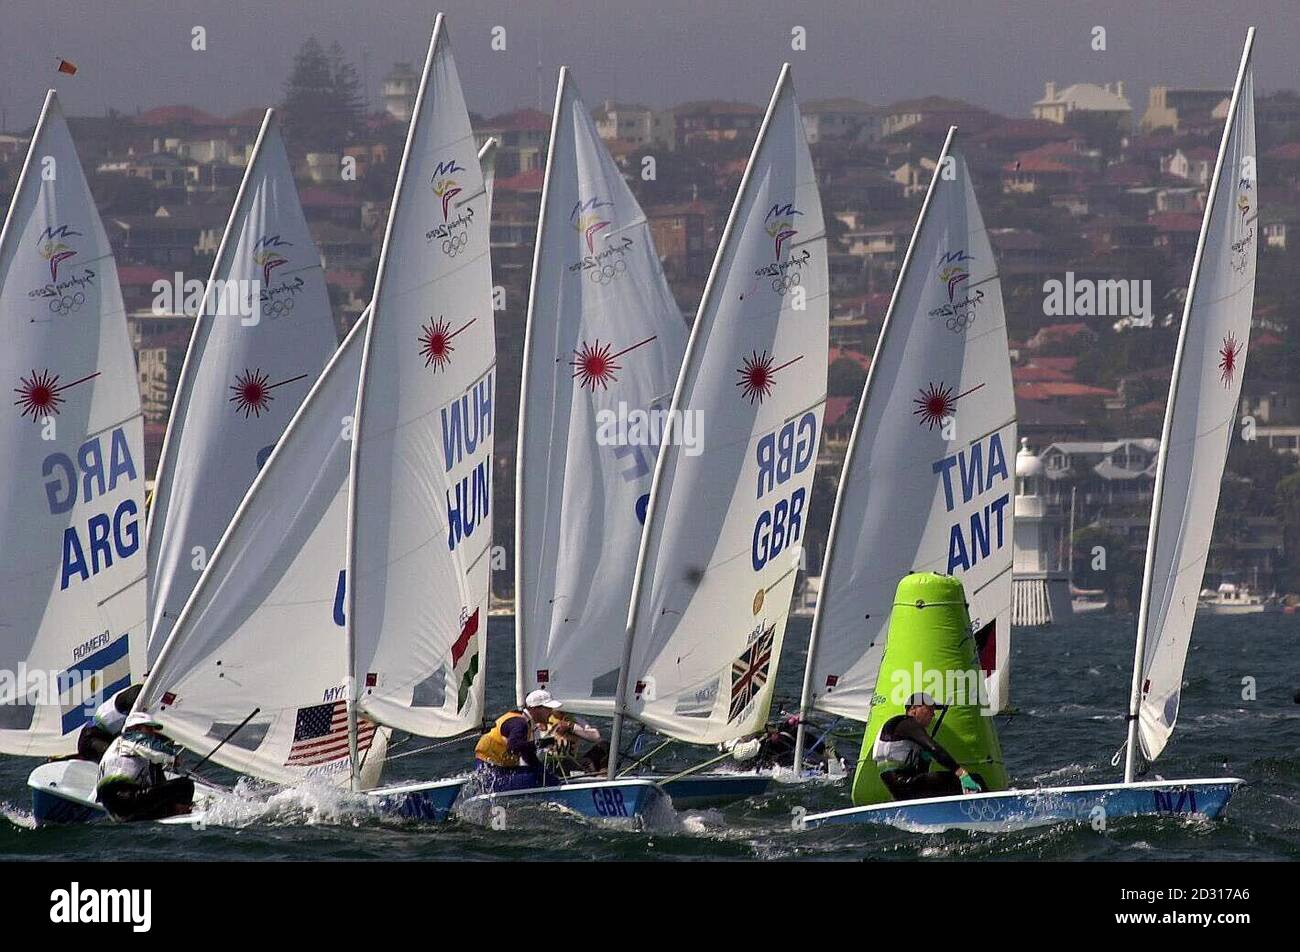 Great Britain's Ben Ainslie (centre) in action during his final race in the Laser Sailing class at the Olympic Games in Rushcutters Bay, Sydney. Ainslie will have to wait on the results of a protest after seeming to claim the Gold medal.   *  The 23 year old started the final race of the series nine points adrift of Brazilian Robert Scheidt. However, a brave and cunning piece of seamanship saw Ainslie pin the Brazilian at the back of the fleet, insuring Scheidt's previously discarded high fleet positions were brought back into the results summary. Stock Photo